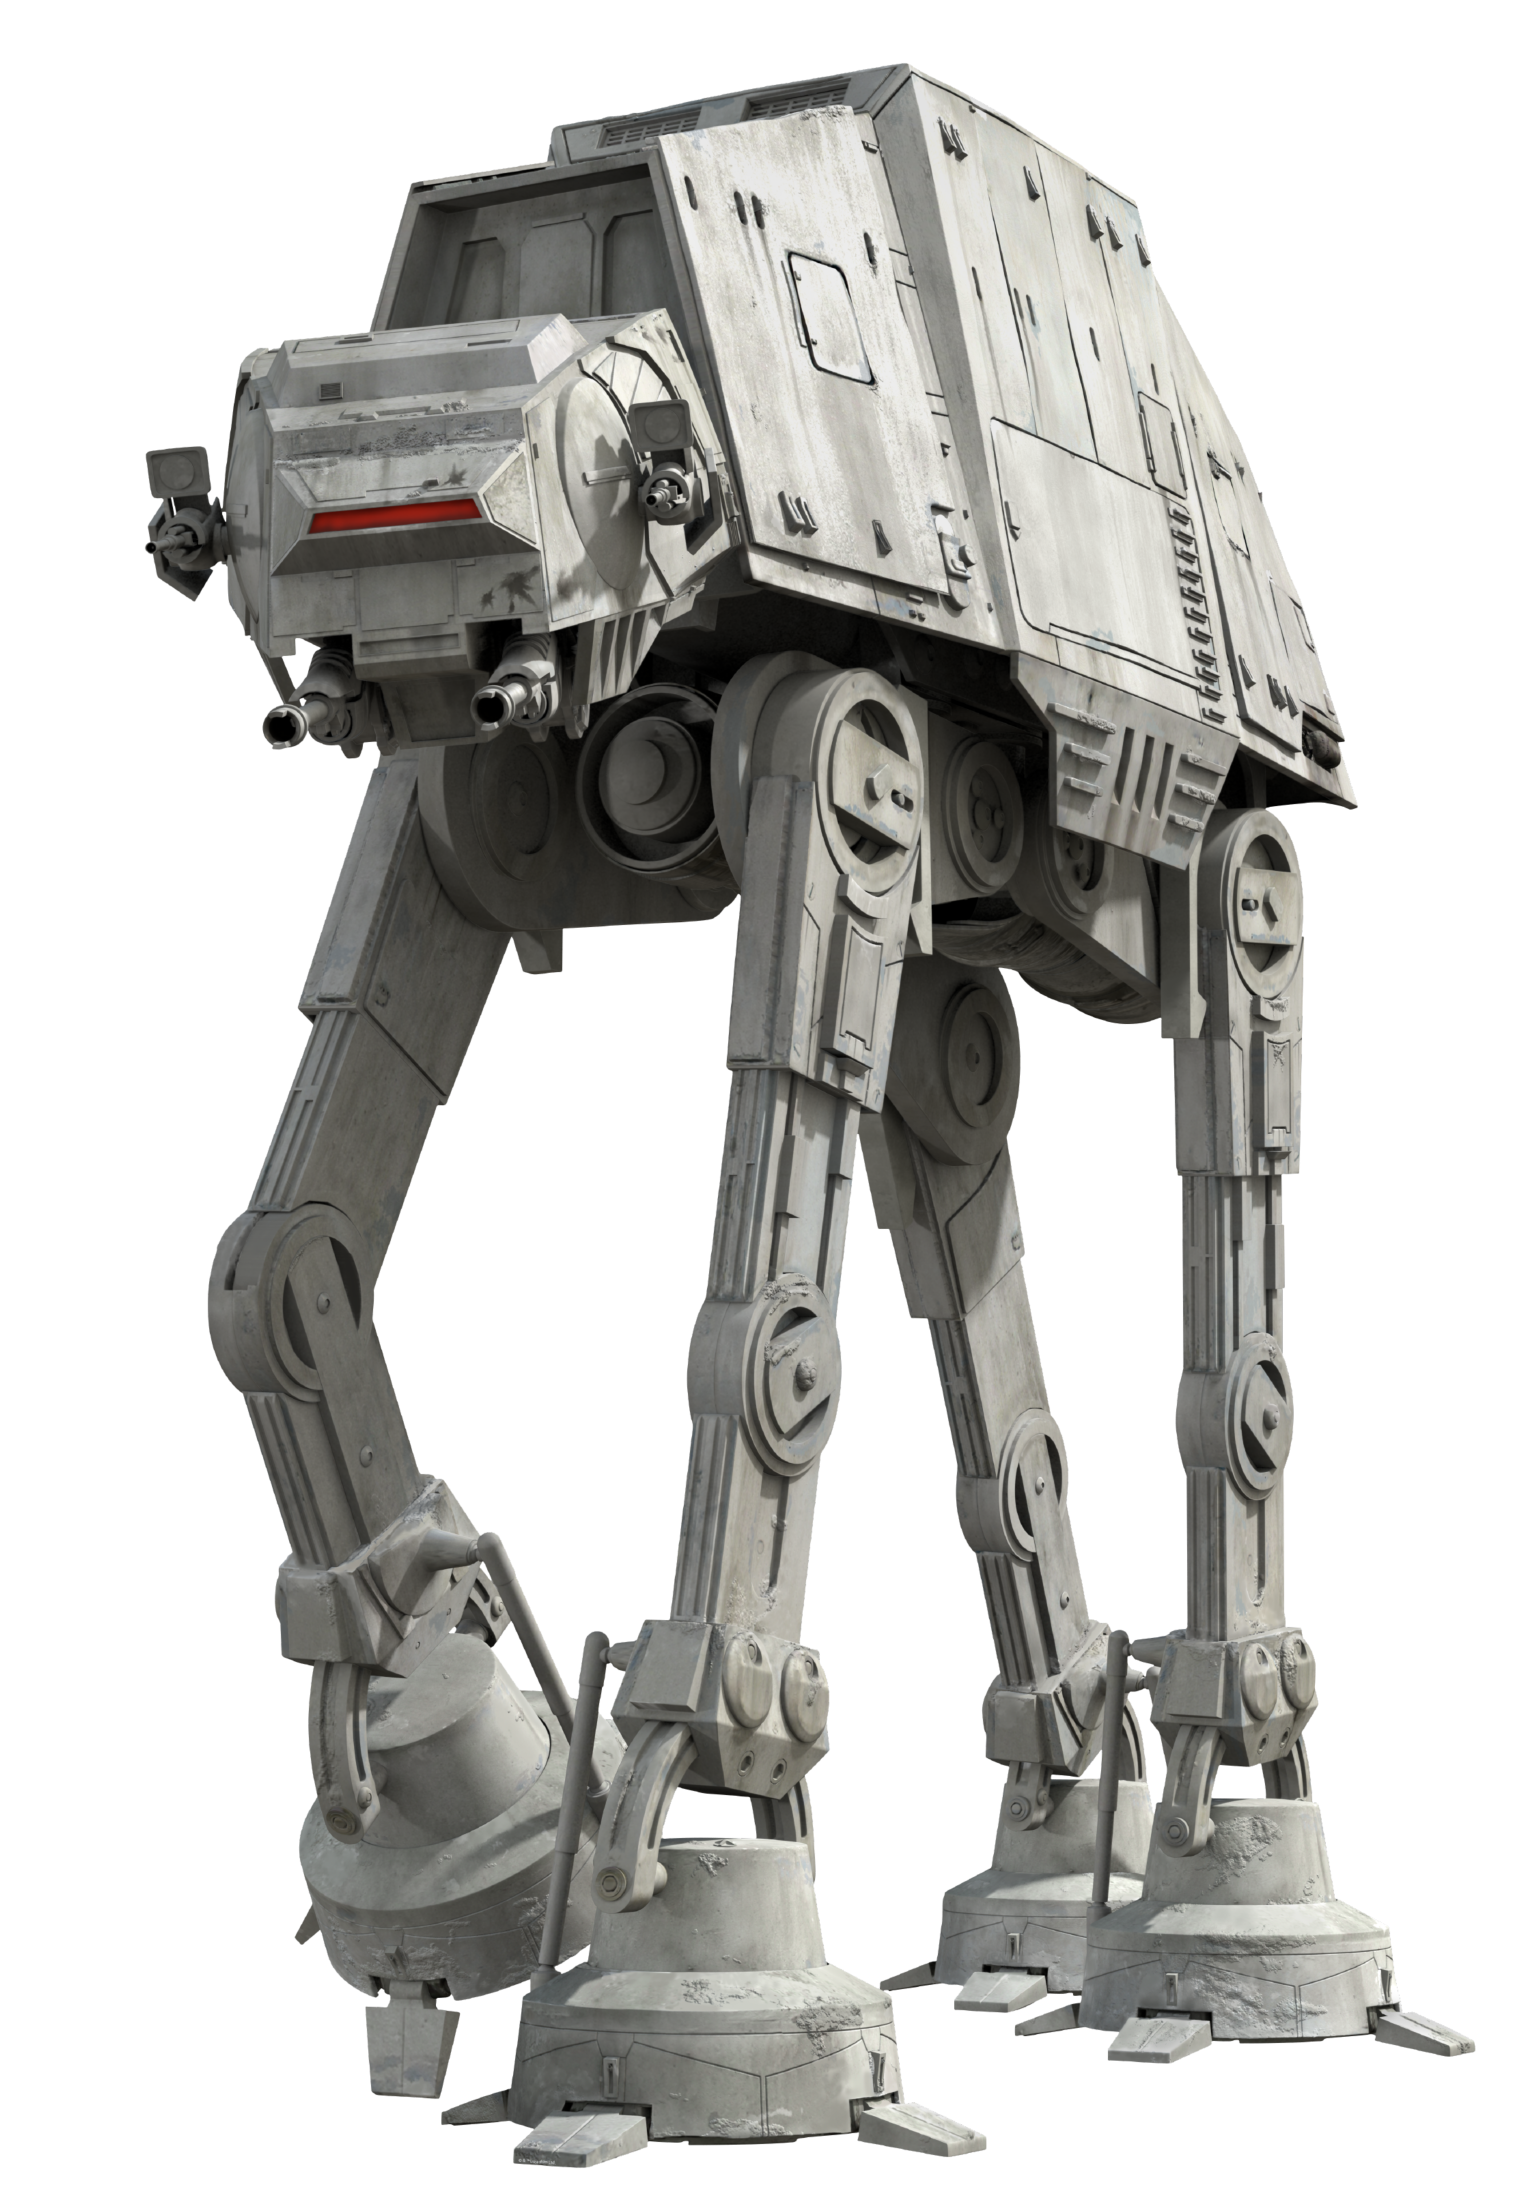 The iconic AT-AT graphic